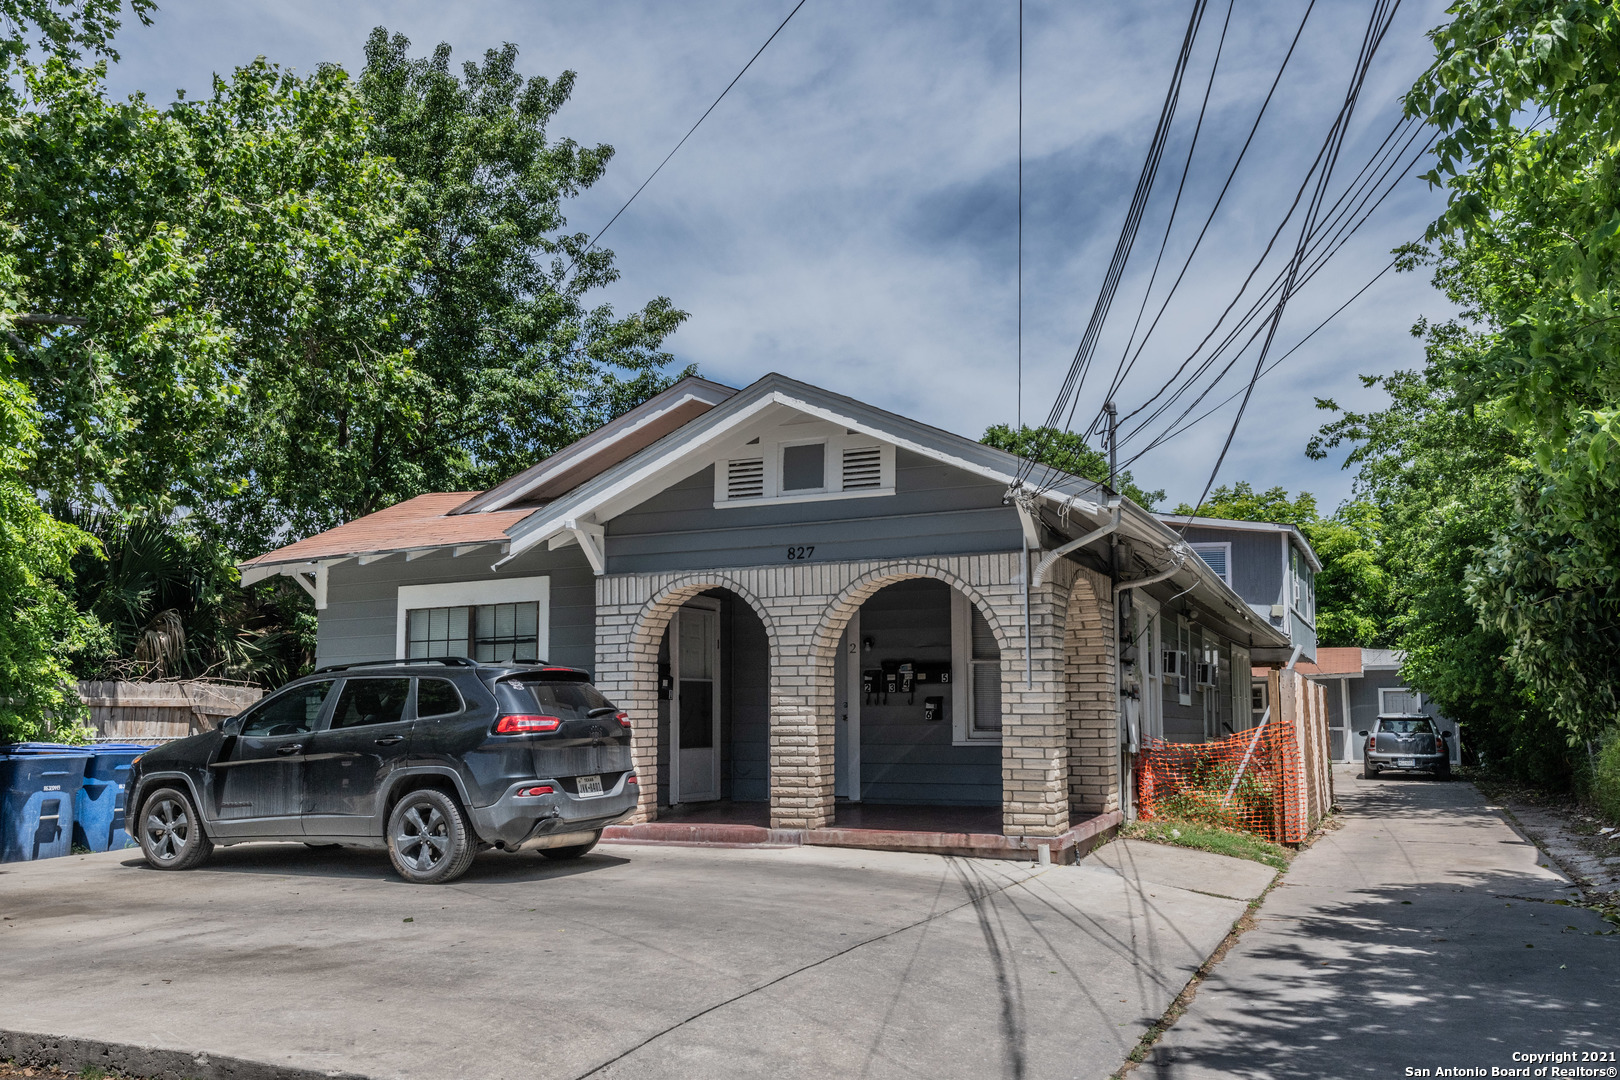 PRISTINE LOCATION ON HIGHLY SOUGHT AFTER ROSEWOOD AVE. NEXT TO CHRIS MADRID.  SIX UNIT NEWLY REMODELED PROPERTY WITH ONE VACANCY.  WOOD FLOORS THROUGHOUT, HIGH END KITCHEN AND OPEN FLOOR PLAN CONCEPT.  THIS IS A CASH FLOWING MACHINE.